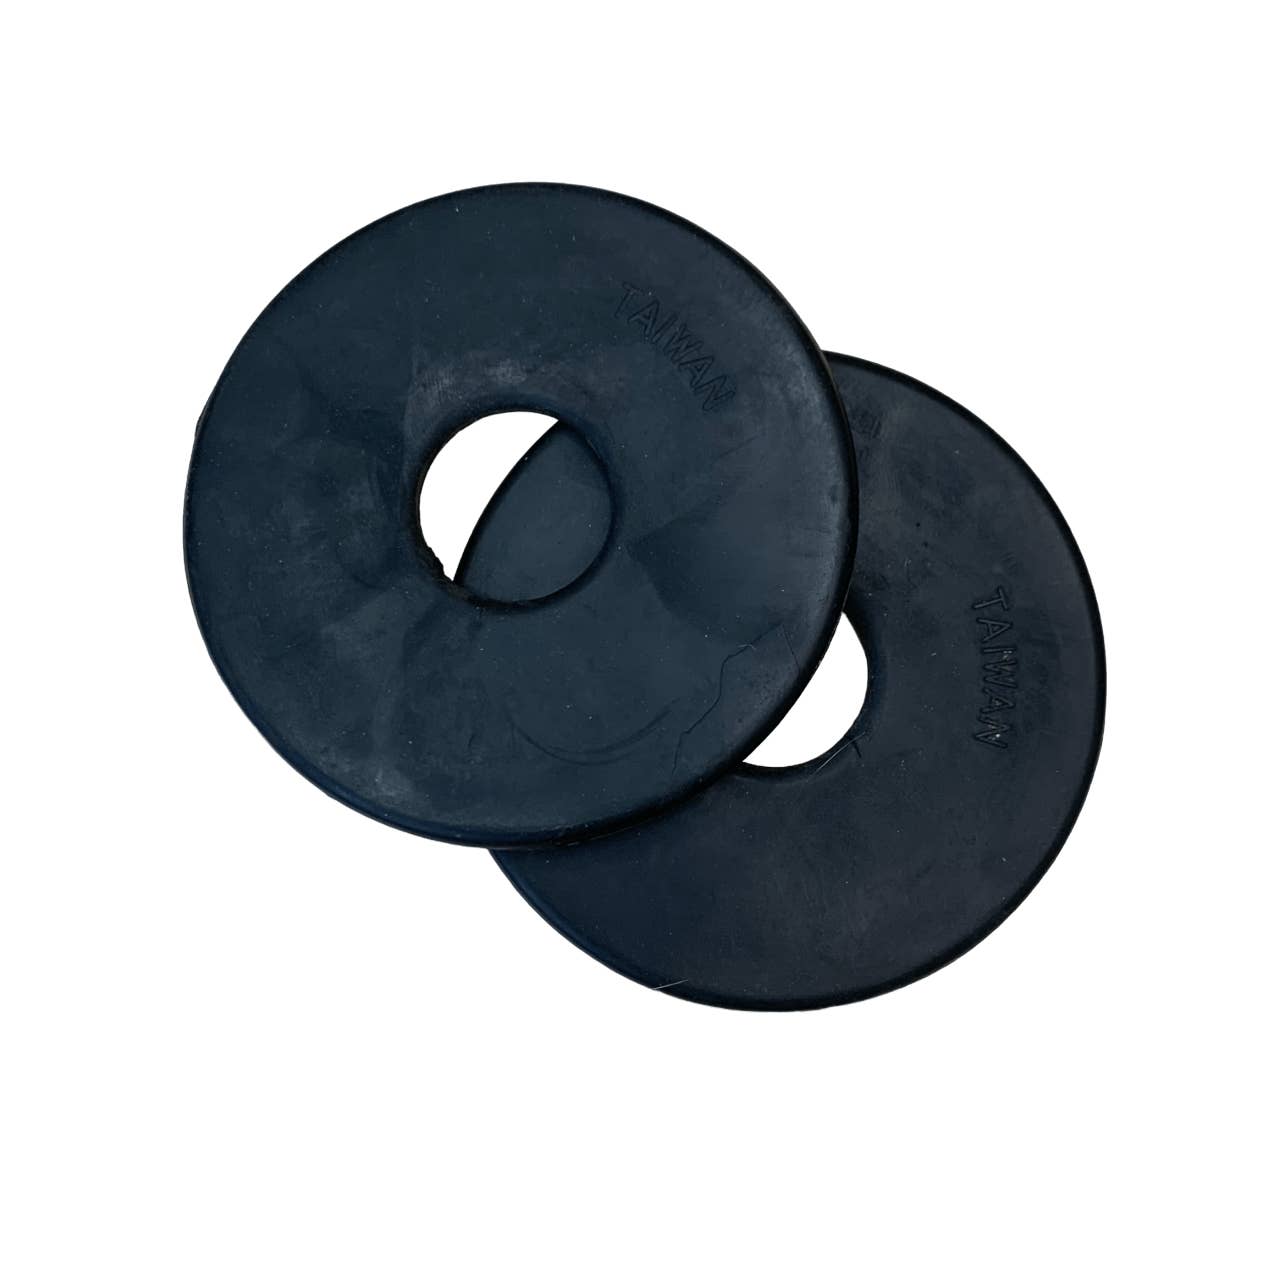 Rubber Bit Guards in Black - One Size